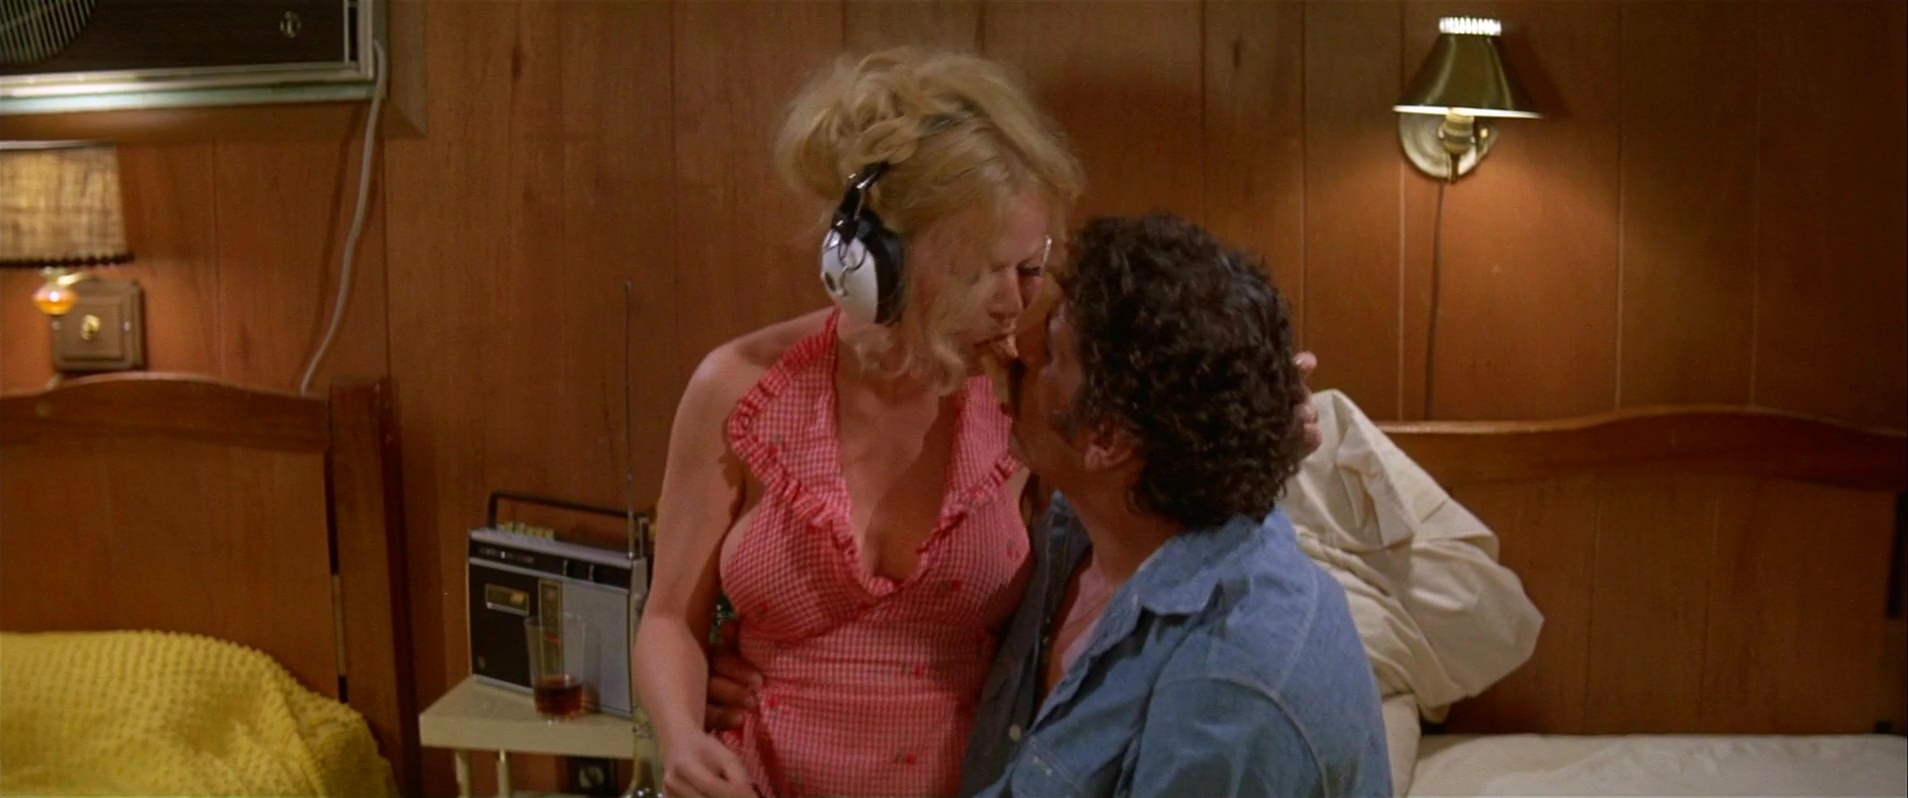 Sally Struthers nude pics.